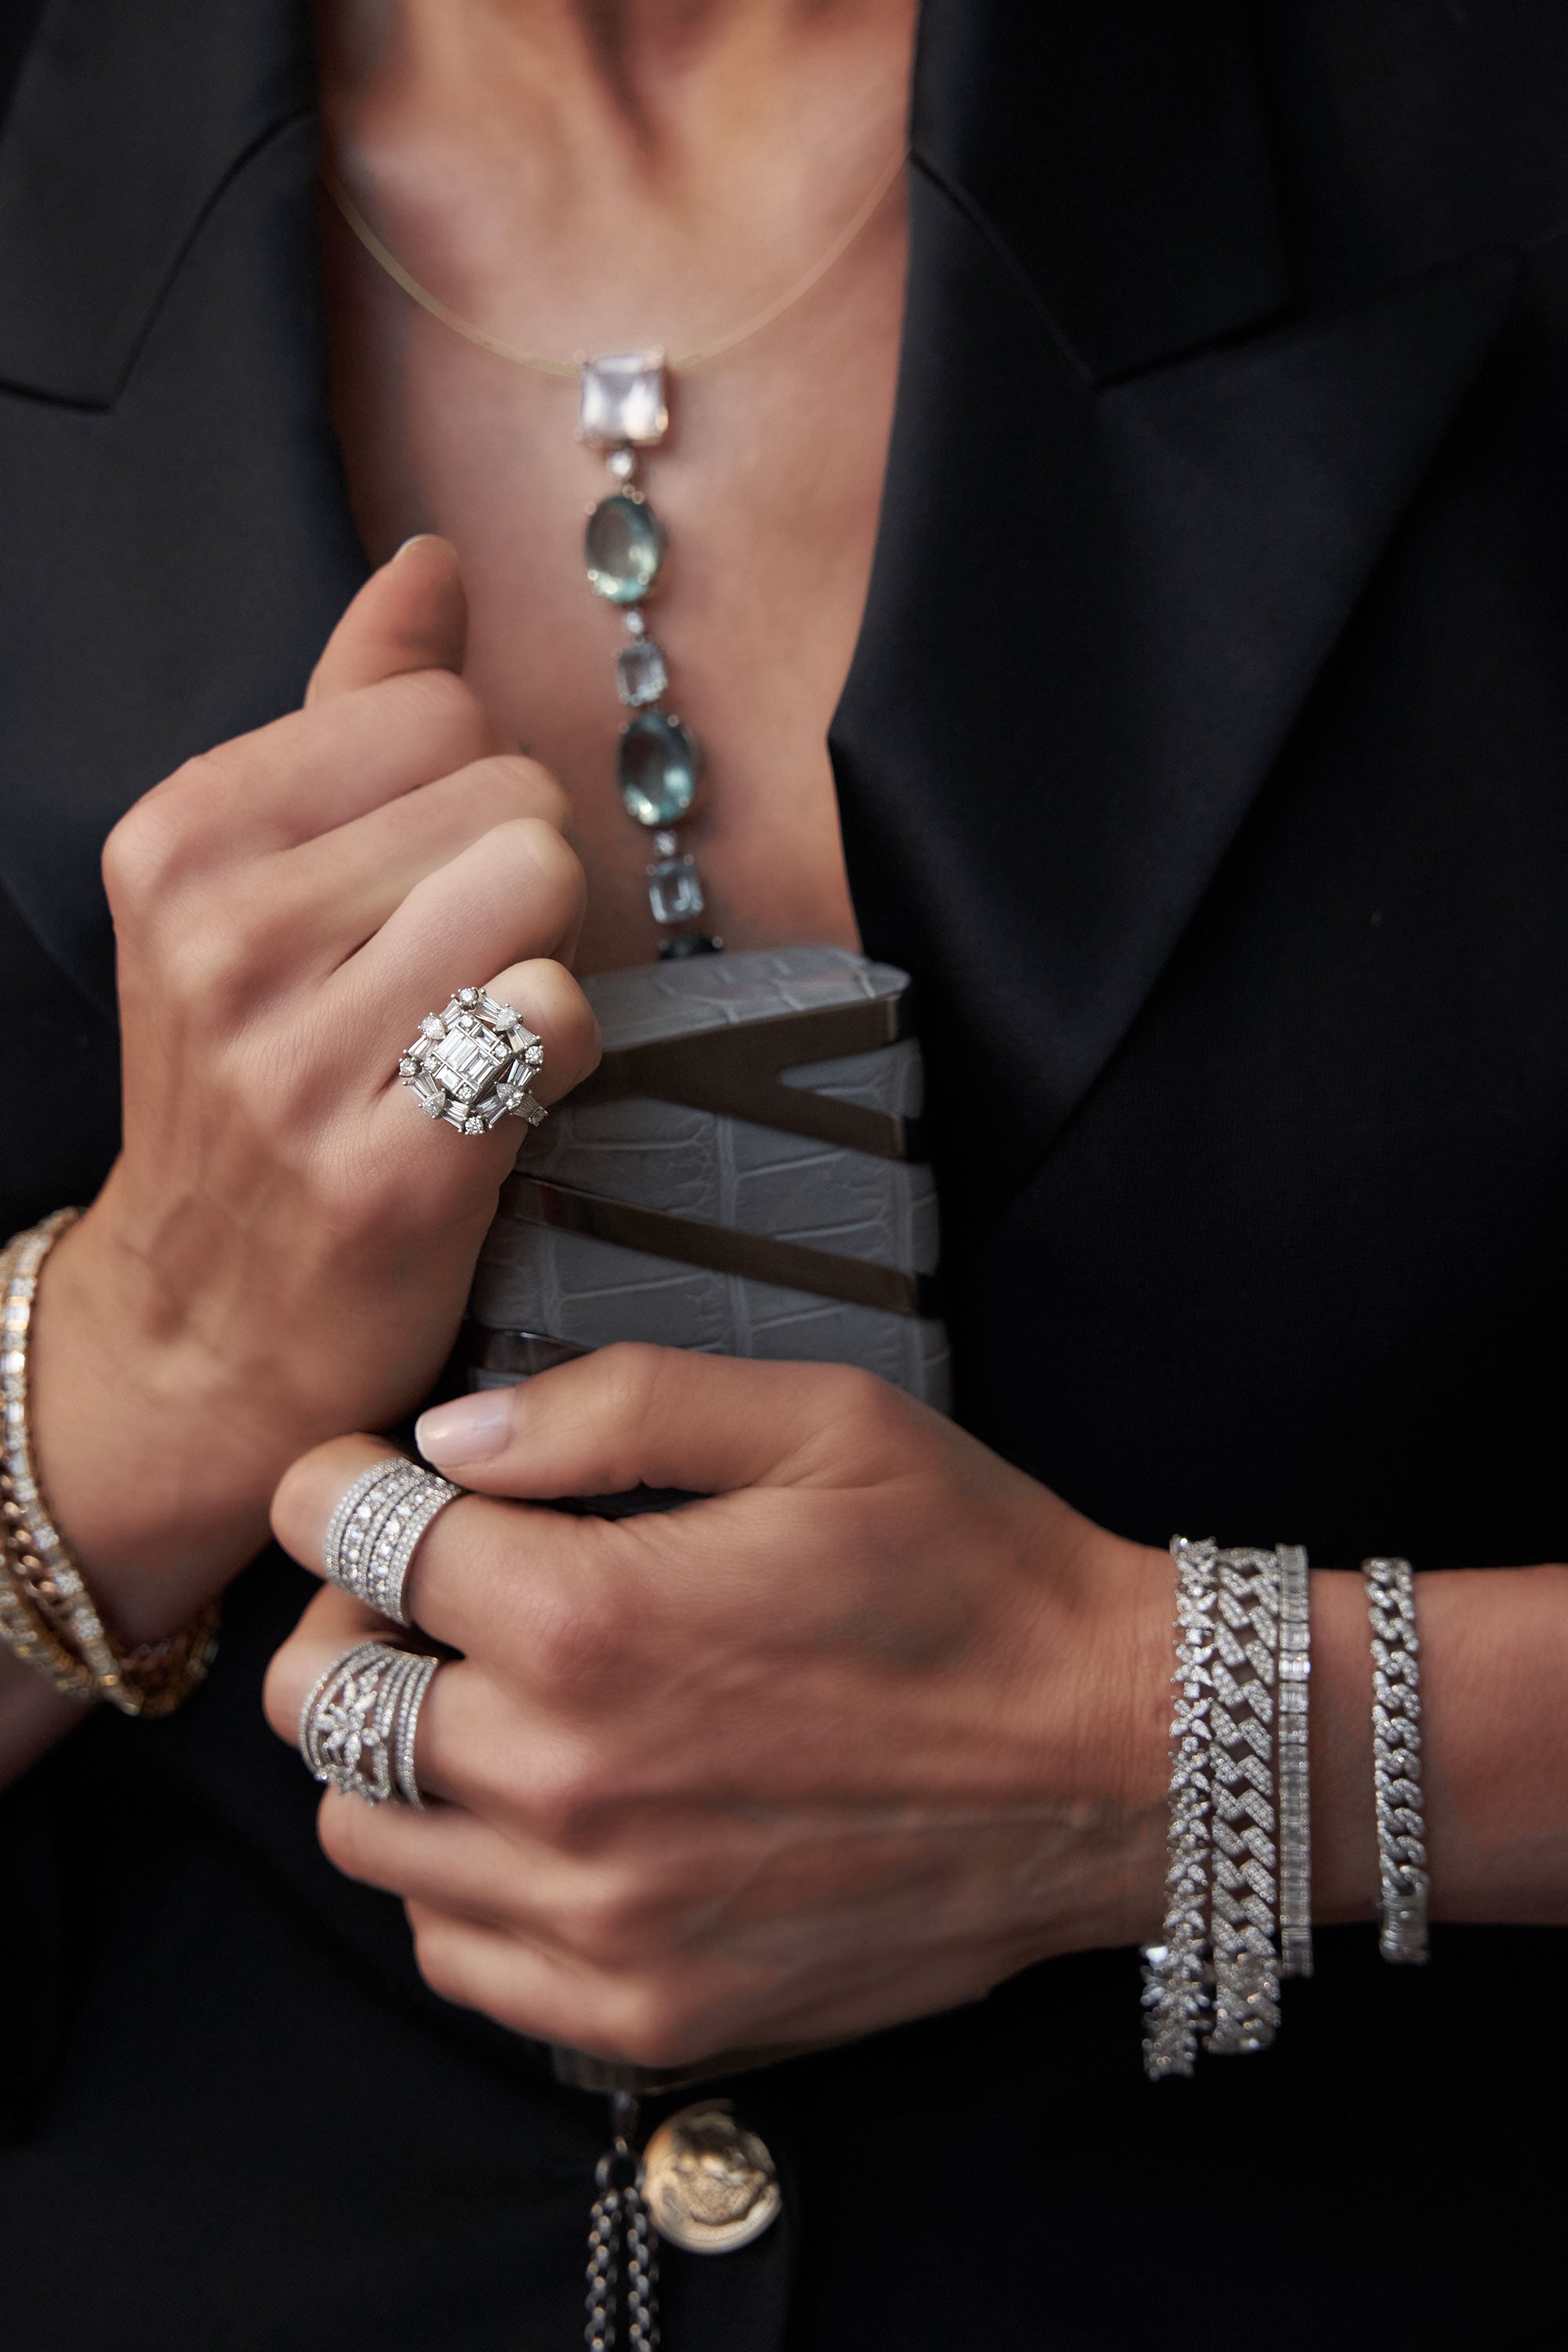 Photoshoot style image of woman wearing rings, bracelets and holding a handbag. 